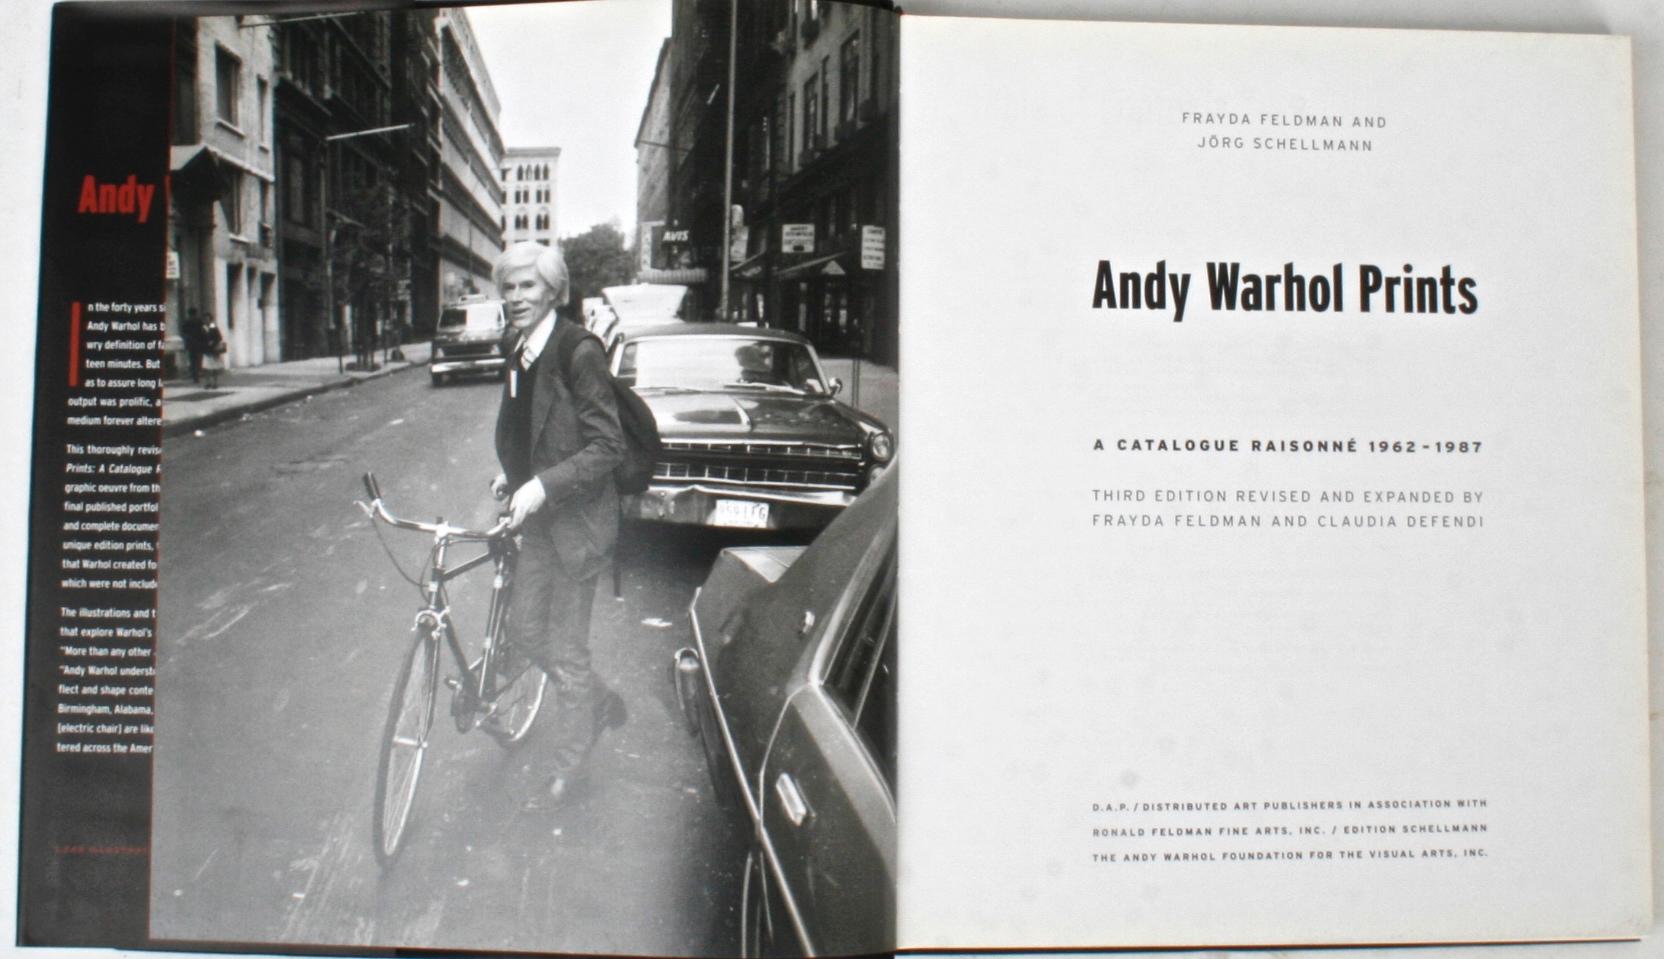 Andy Warhol Prints, A Catalogue Raisonné 1962-1987. New York: D.A.P./Distributed Art Publishers, 1997. Third edition hardcover with dust jacket. 303 pp. A reference catalogue that traces Warhol's complete graphic oeuvre from his first unique works